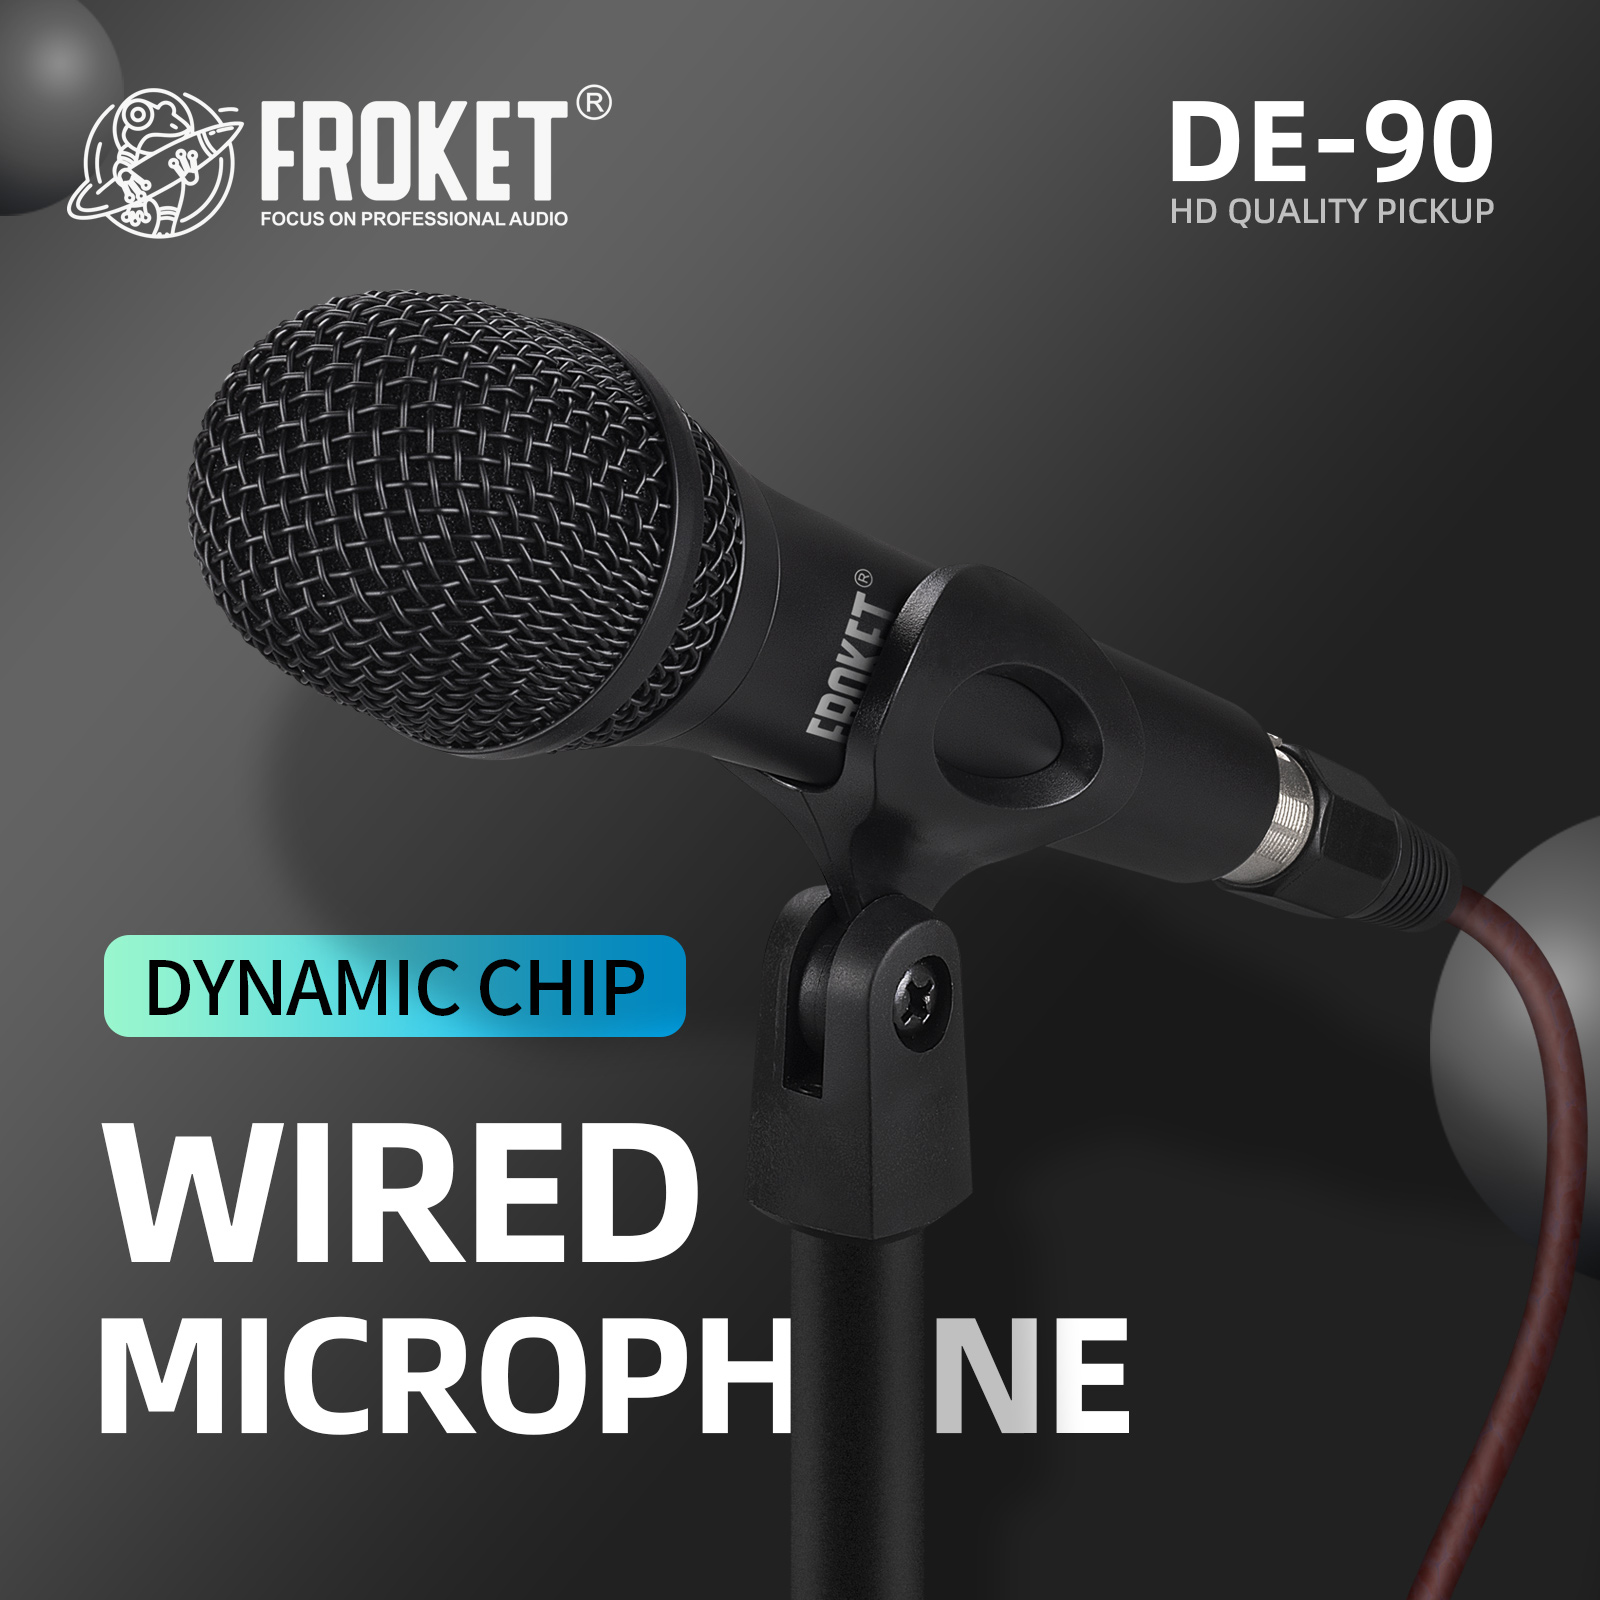 DE-90 Professional Wired Microphone